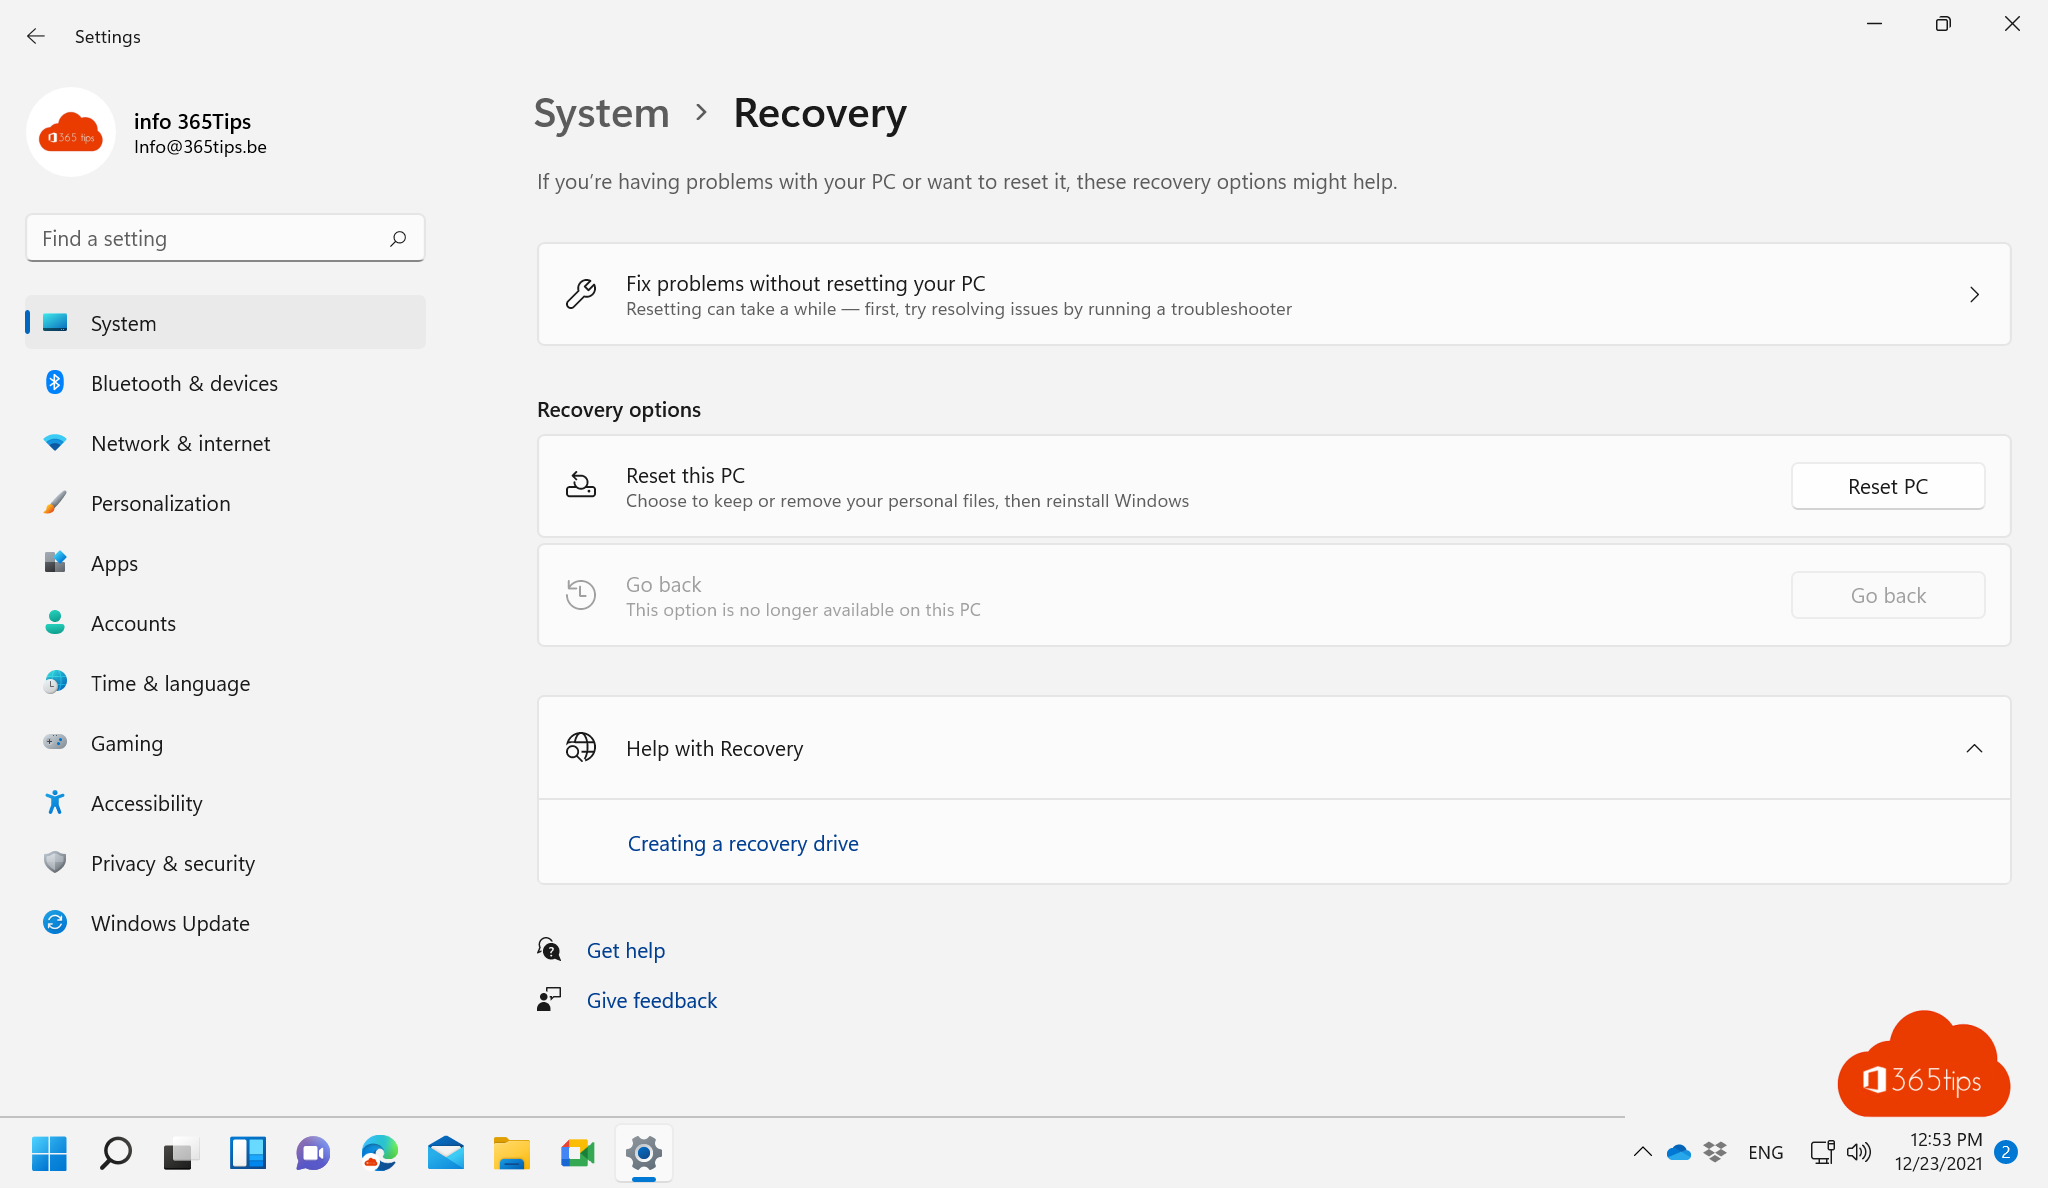 How to restore a PC with Windows 11 to its factory settings?